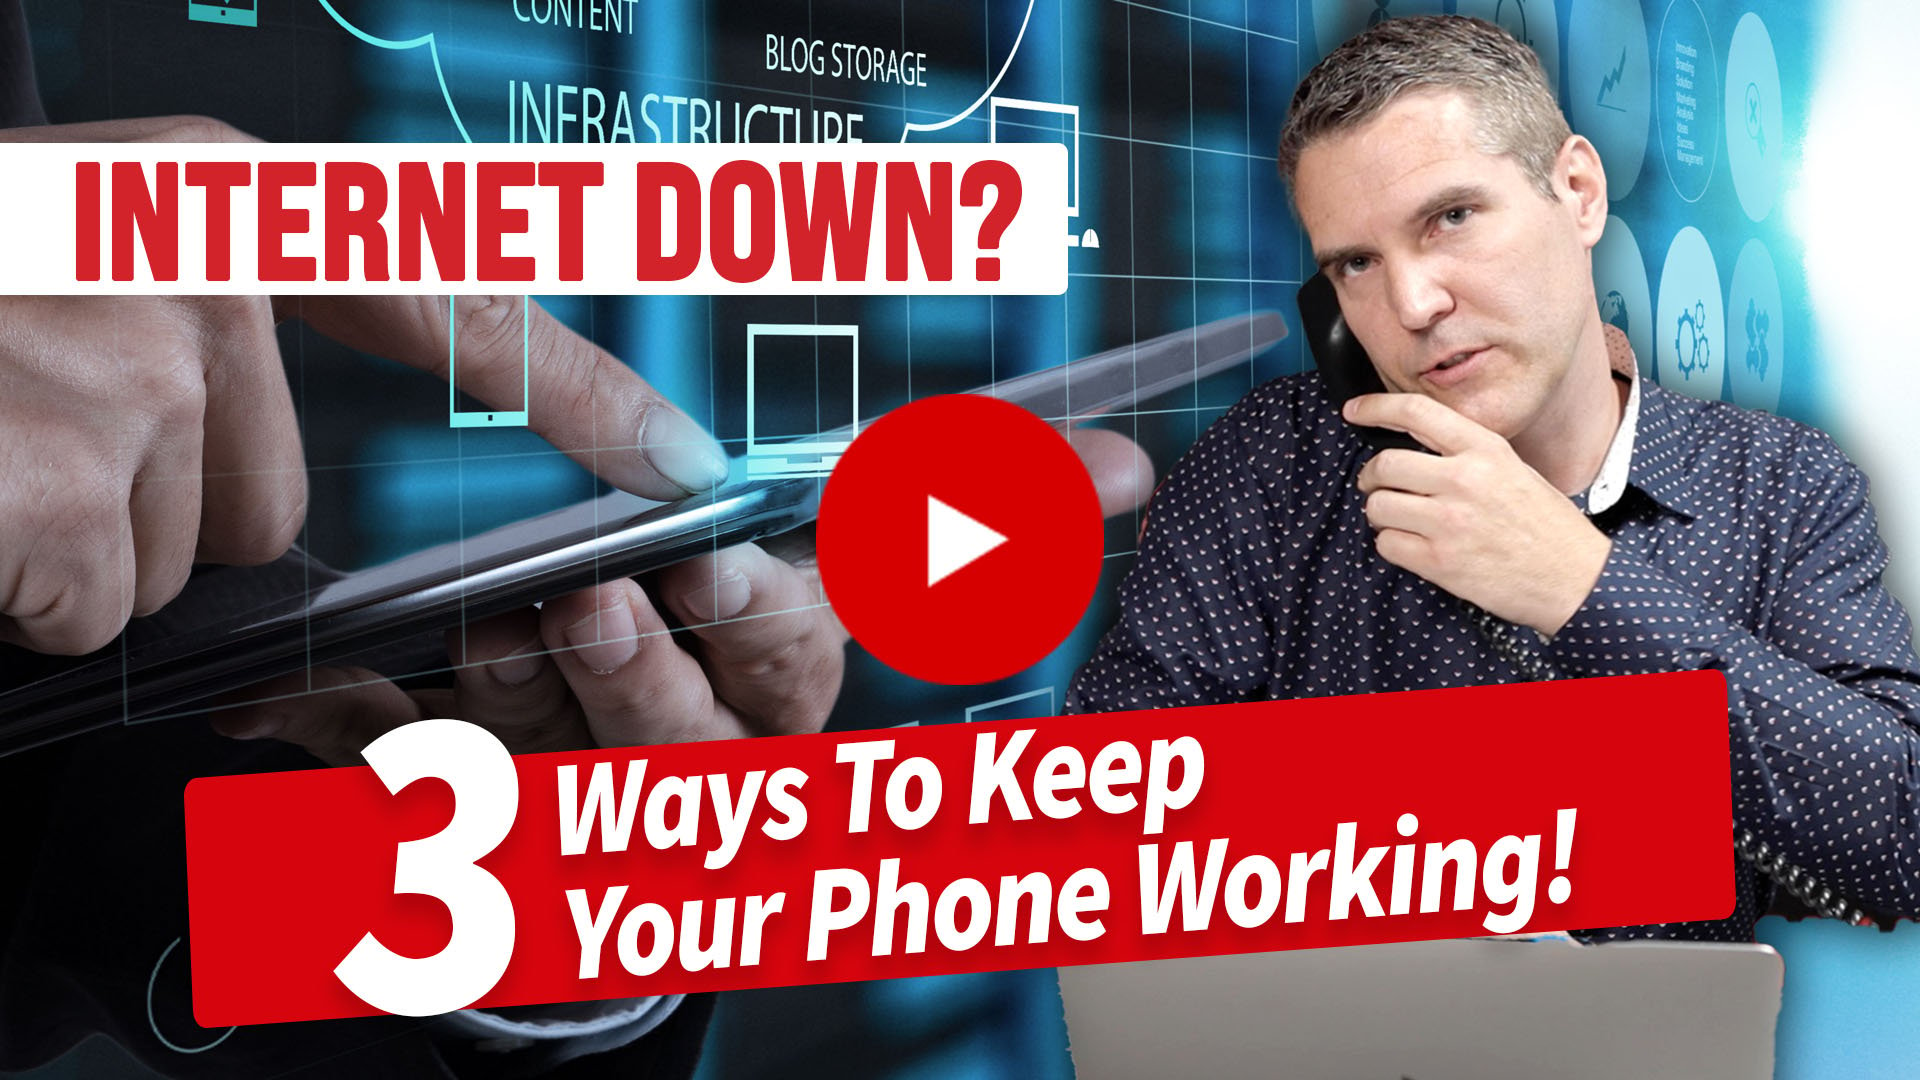 Internet Down? 3 Ways To Keep Your Phones Working